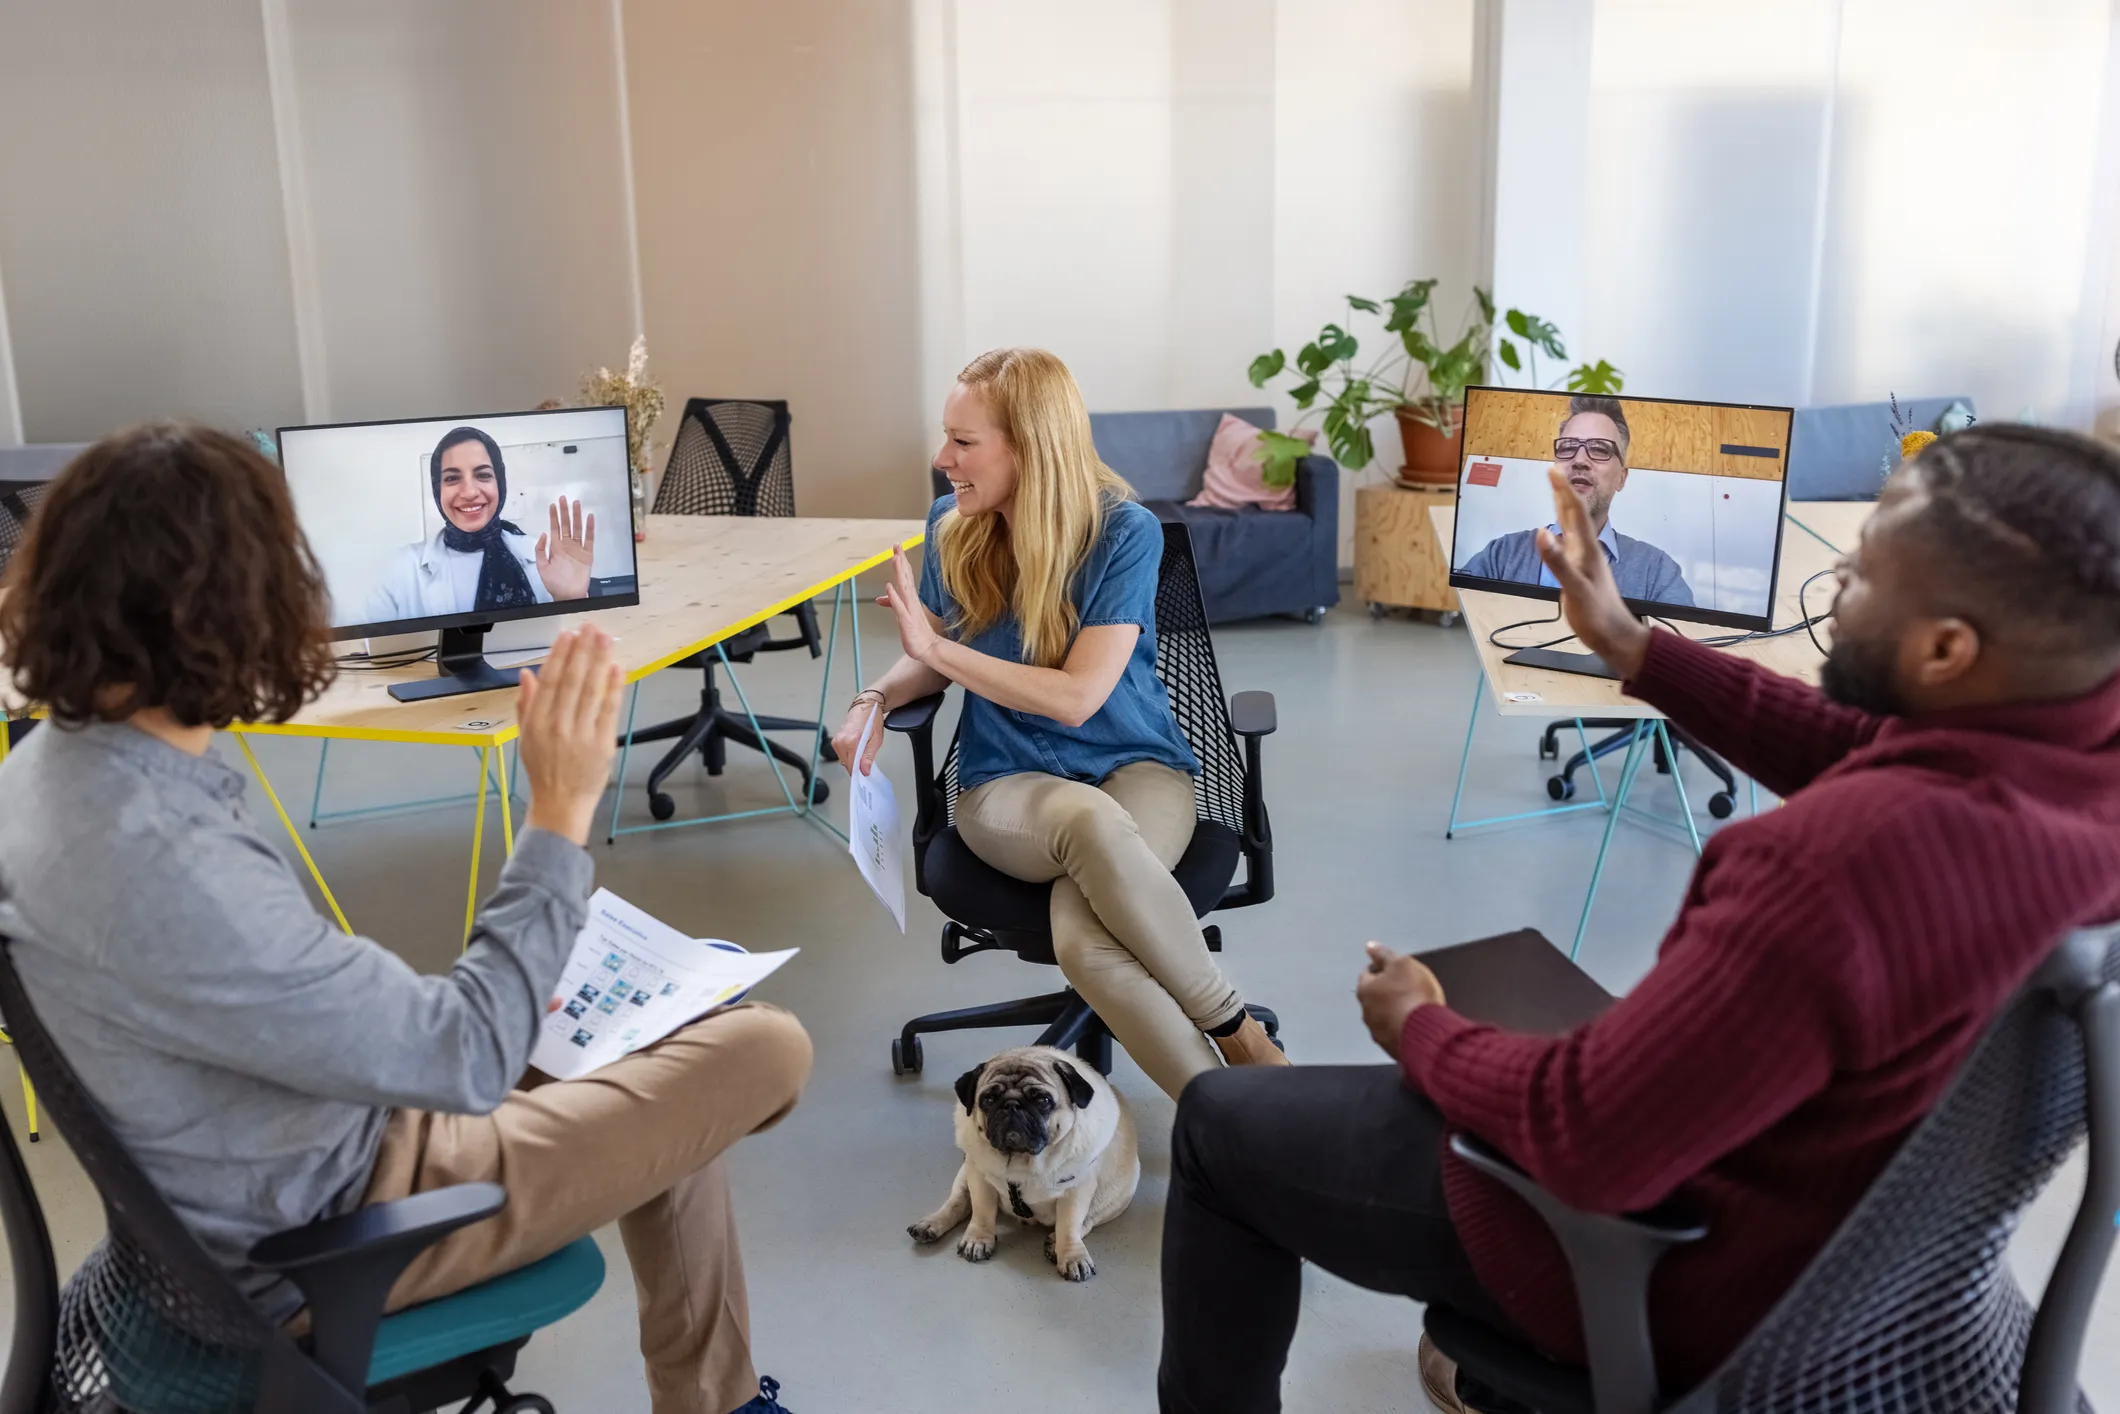 Several people gathered for a meeting, one person is joining remotely and can be seen on a monitor